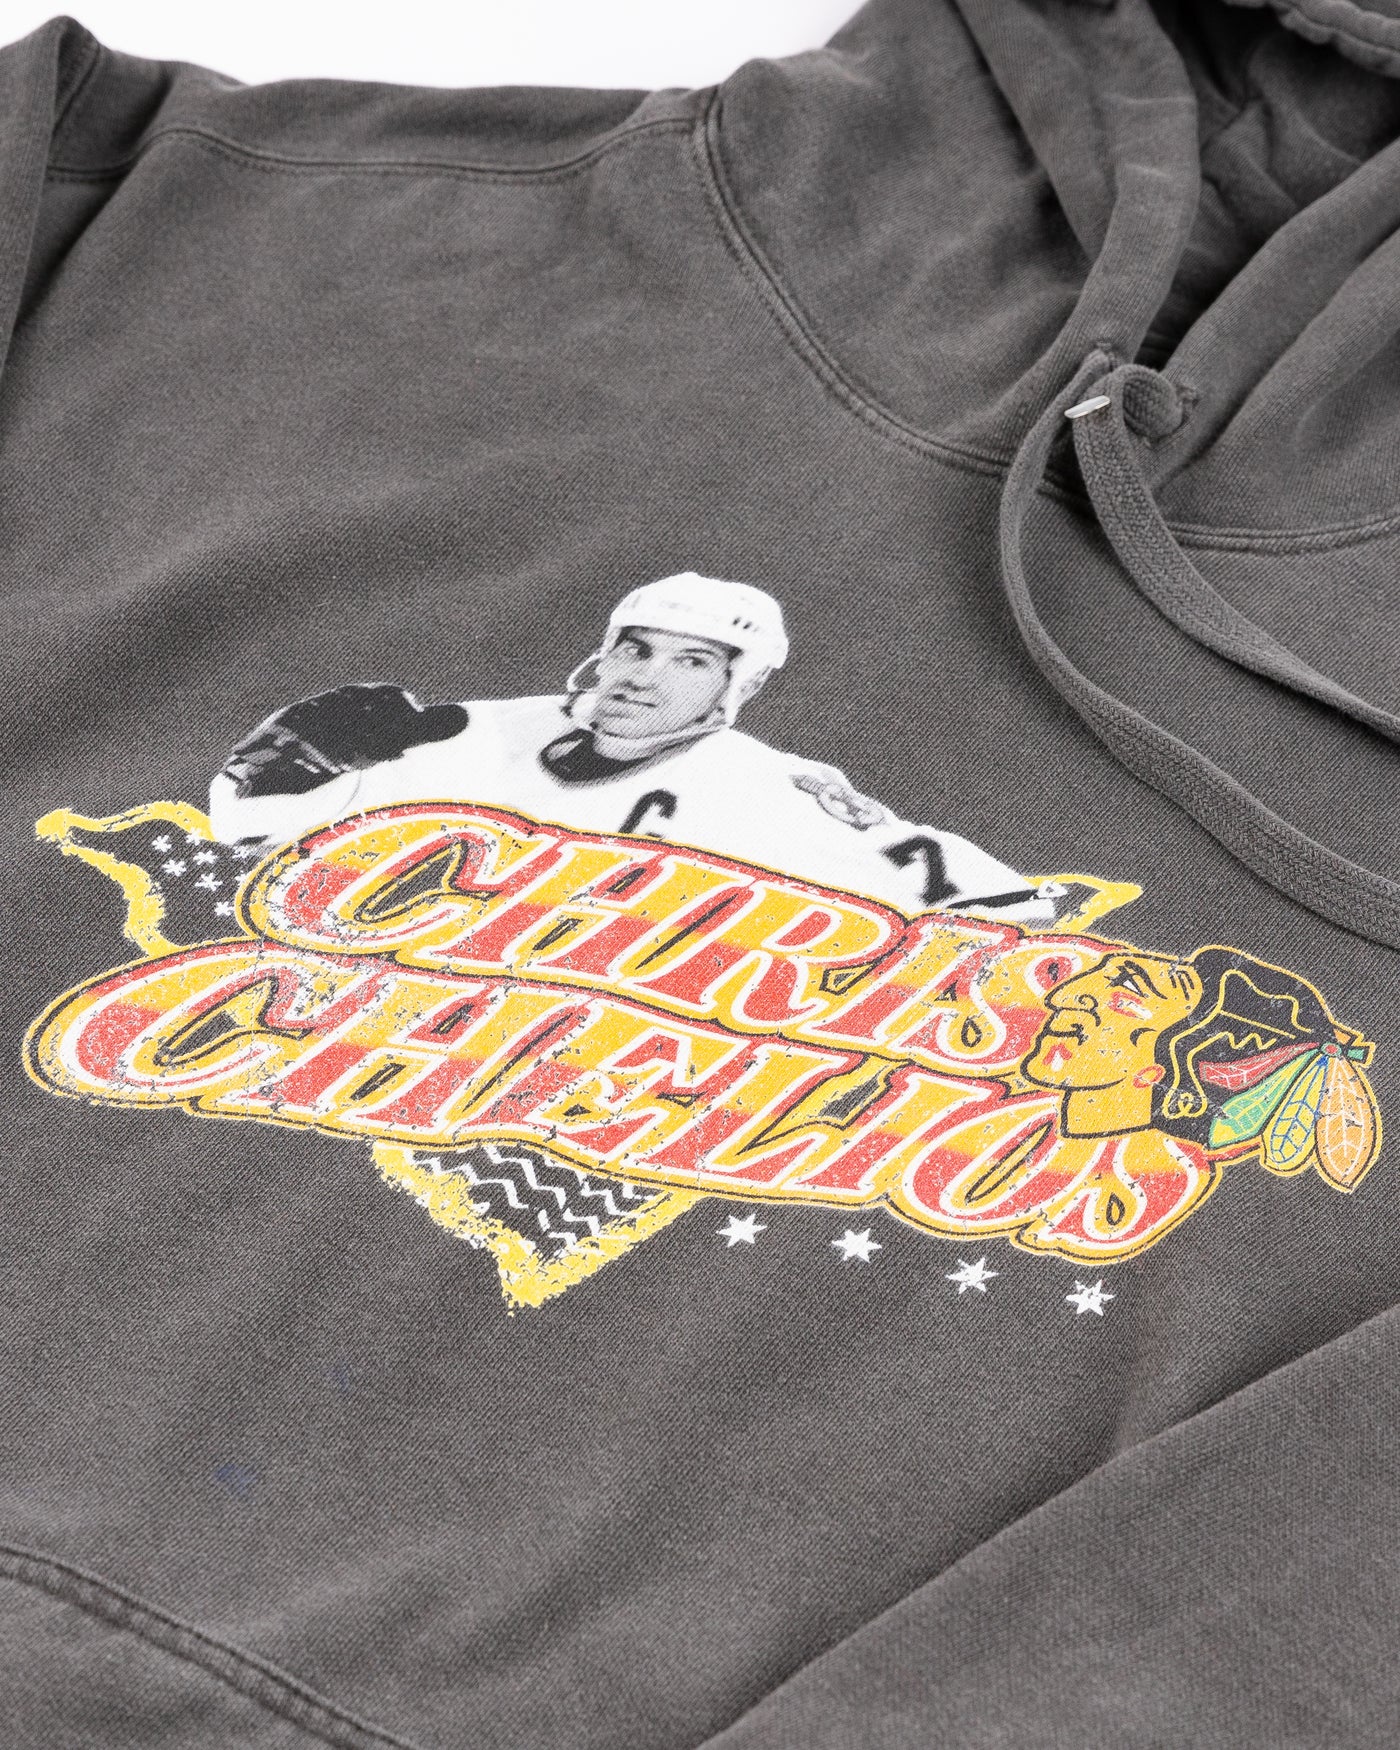 grey Chris Chelios vintage inspired hoodie with Chicago Blackhawks branding - front detail lay flat